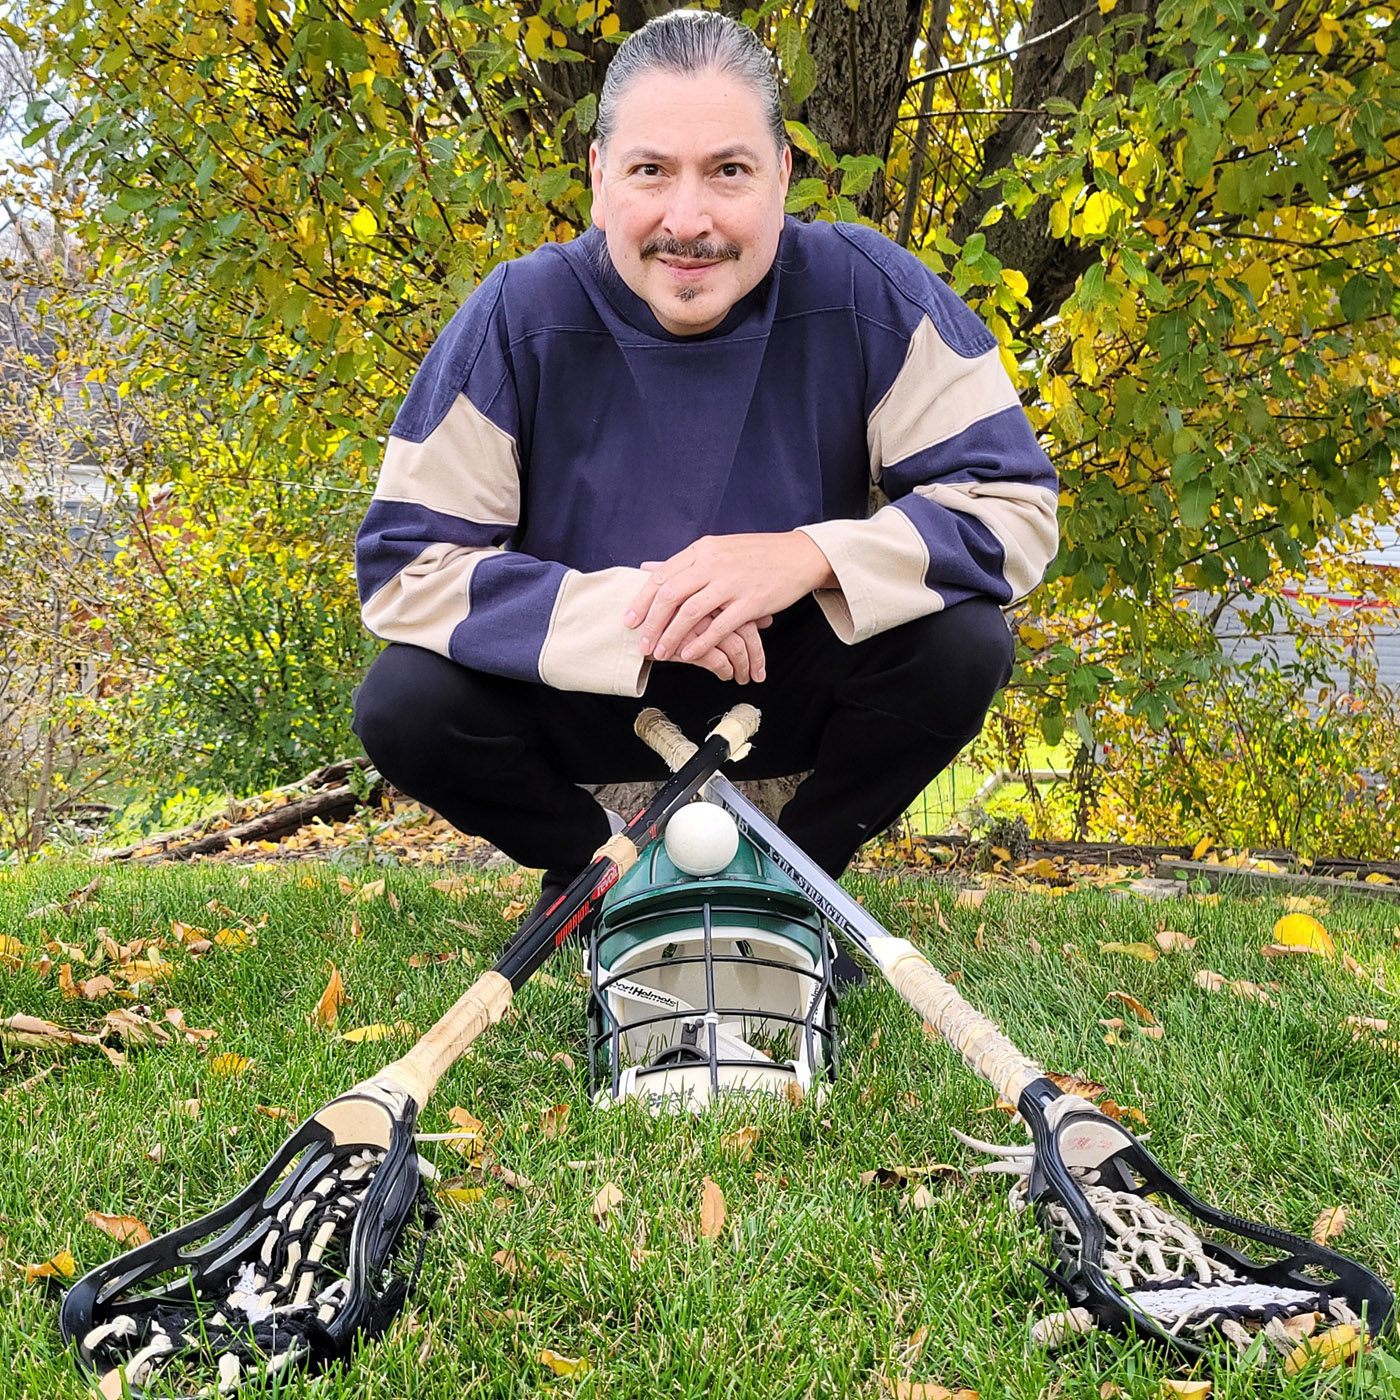 Photograph portrait of Don D Basina smiling and crouched down in the grass on a sunny day in front of a pair of lacrosse sticks that inspired some dd_baz designs.